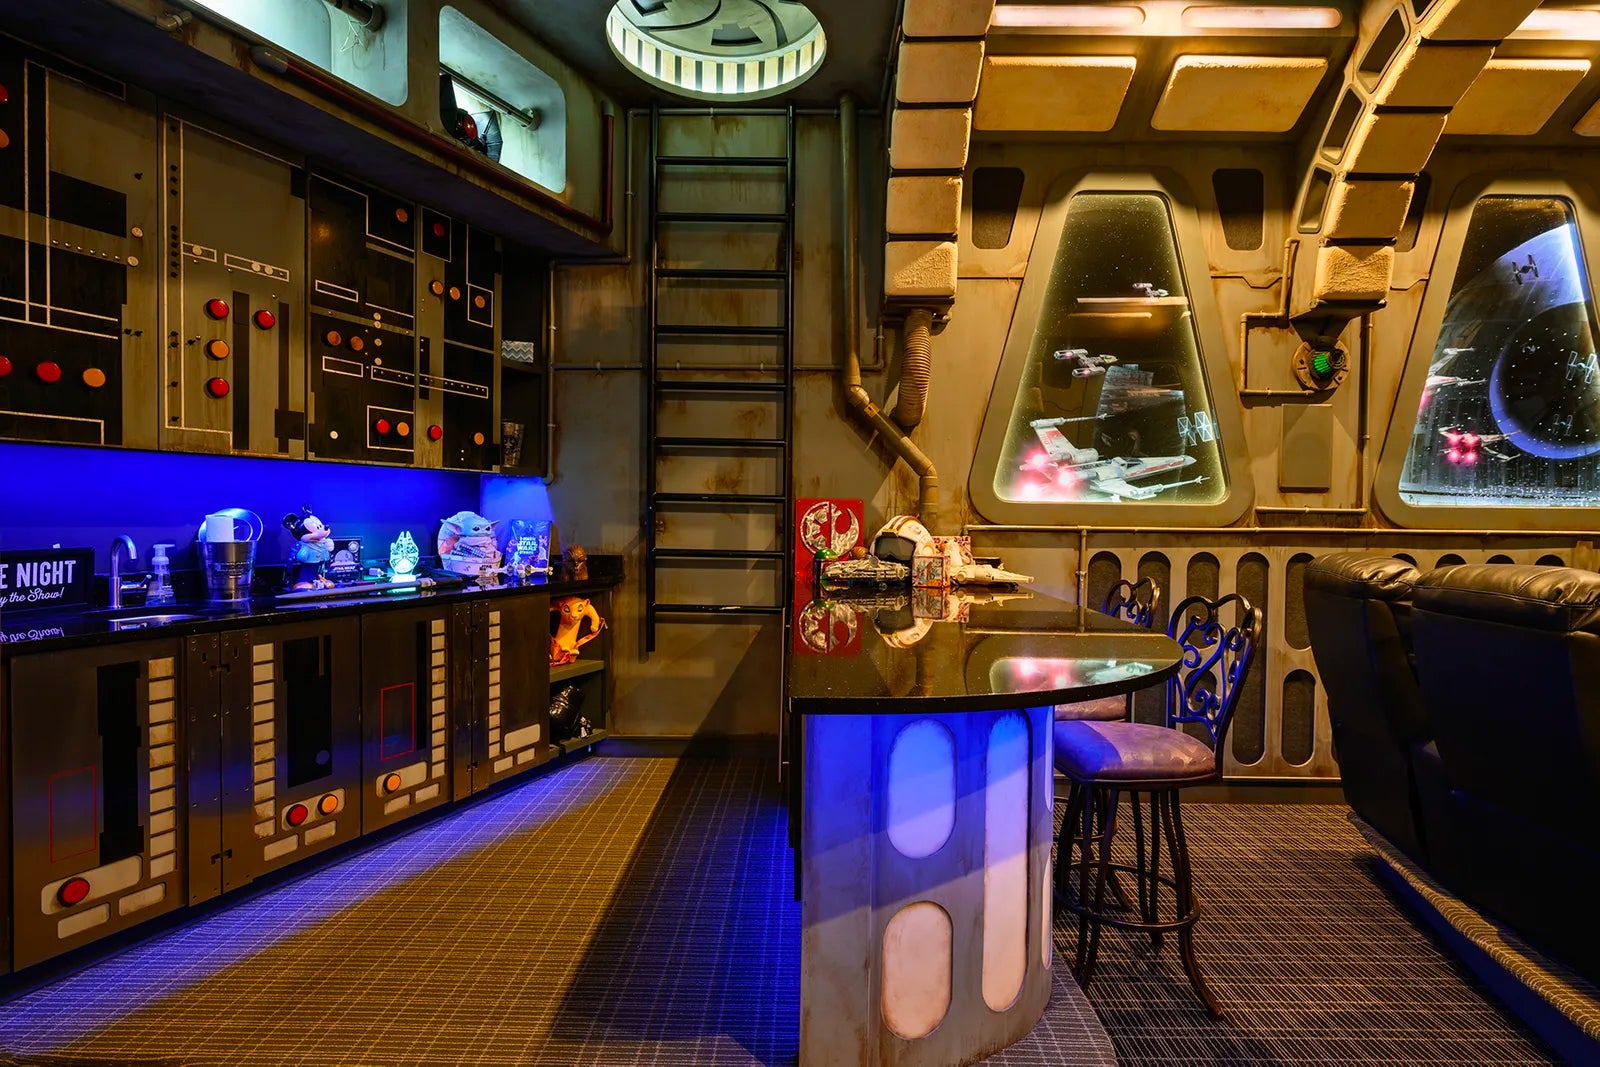 This $21 Million Star Wars Millennium Falcon-Themed Home Theatre Comes With a Free Mansion